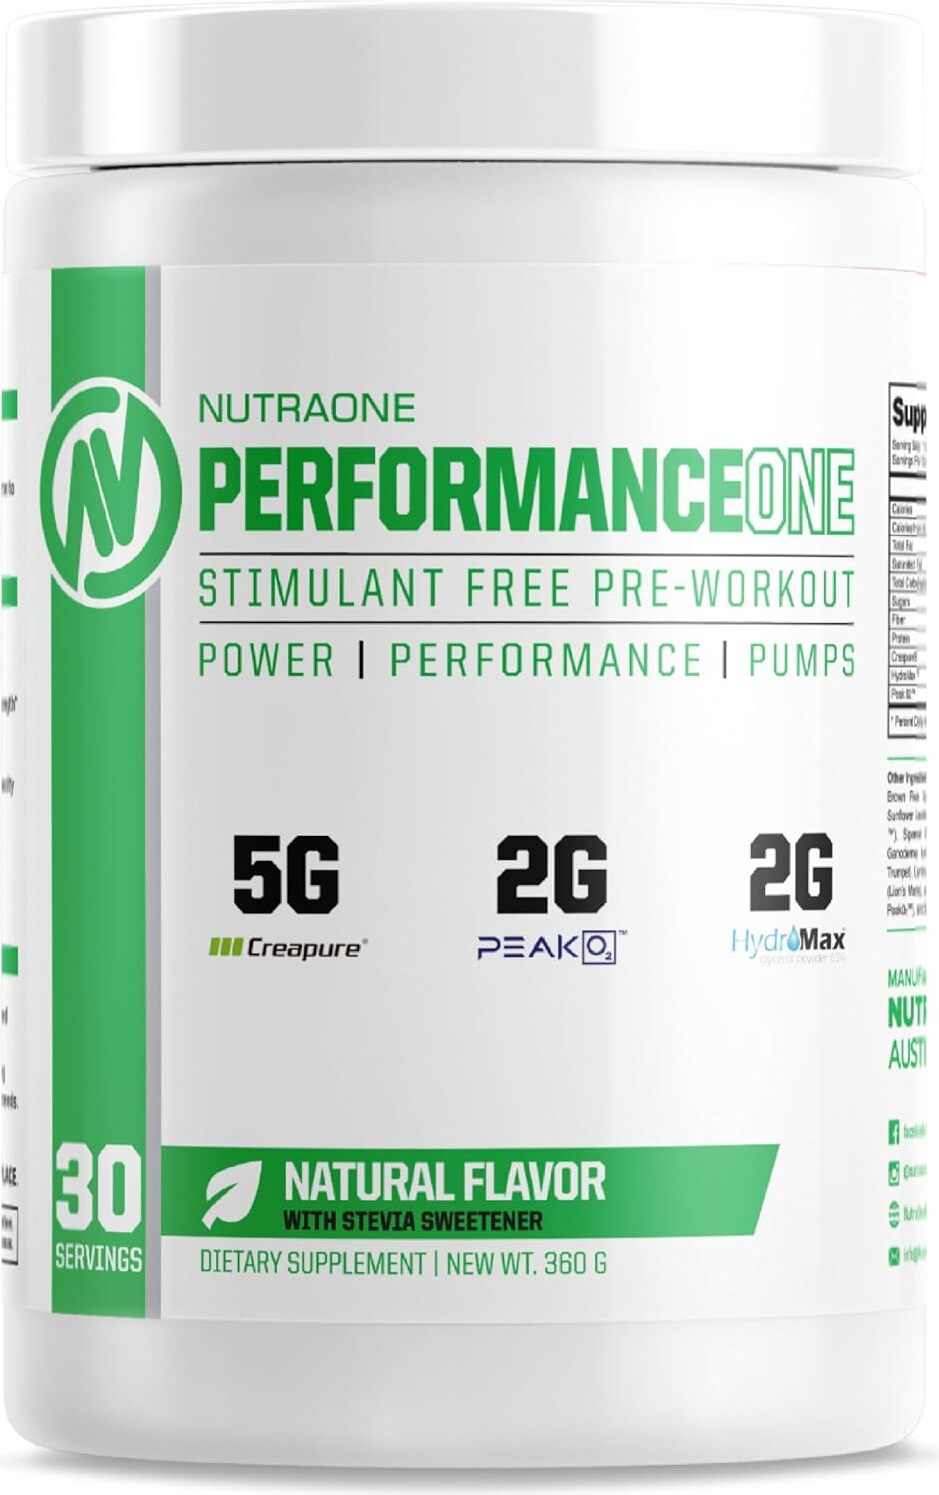 NutraOne PerformanceOne | News & Prices at PricePlow